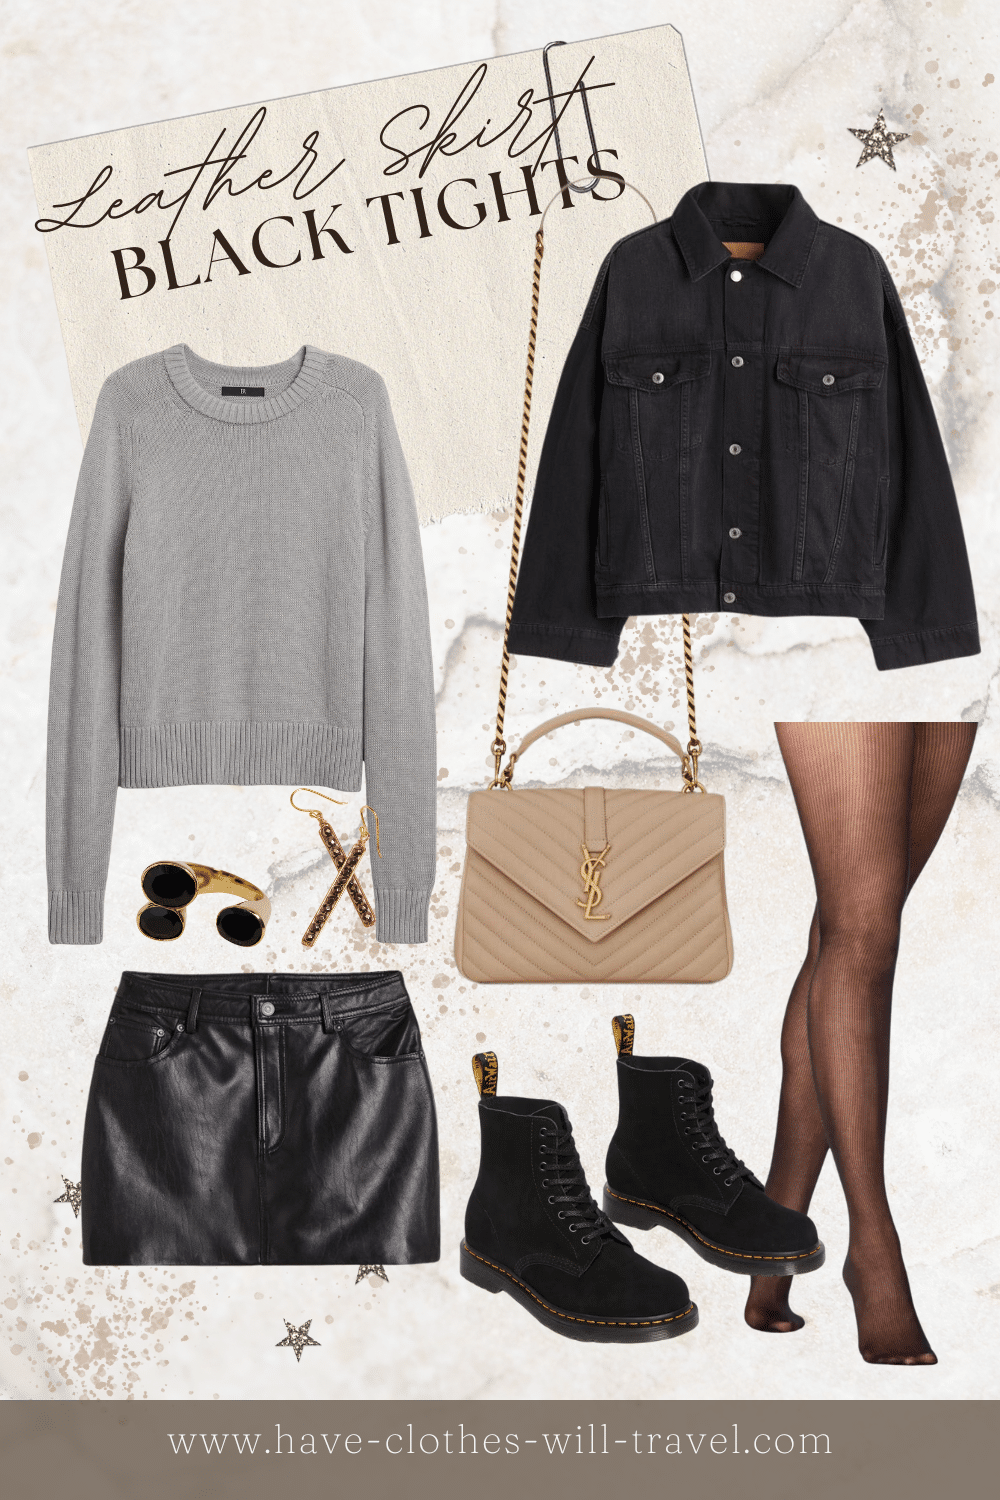 A black leather skirt outfit for winter featuring an oversized jacket and grey sweater